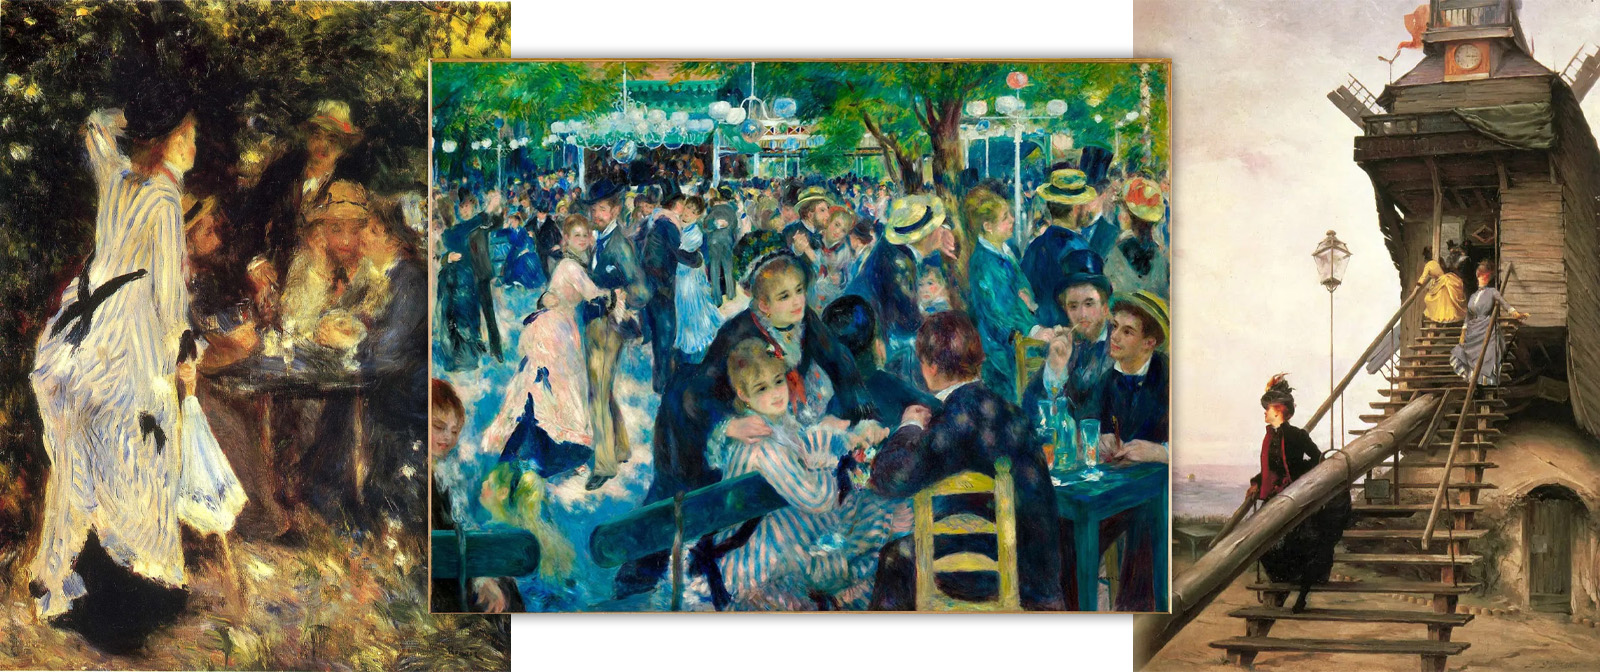 It's time for fun. ‘Moulin de la Galette’: Renoir's largest painting that will leave no one indifferent.